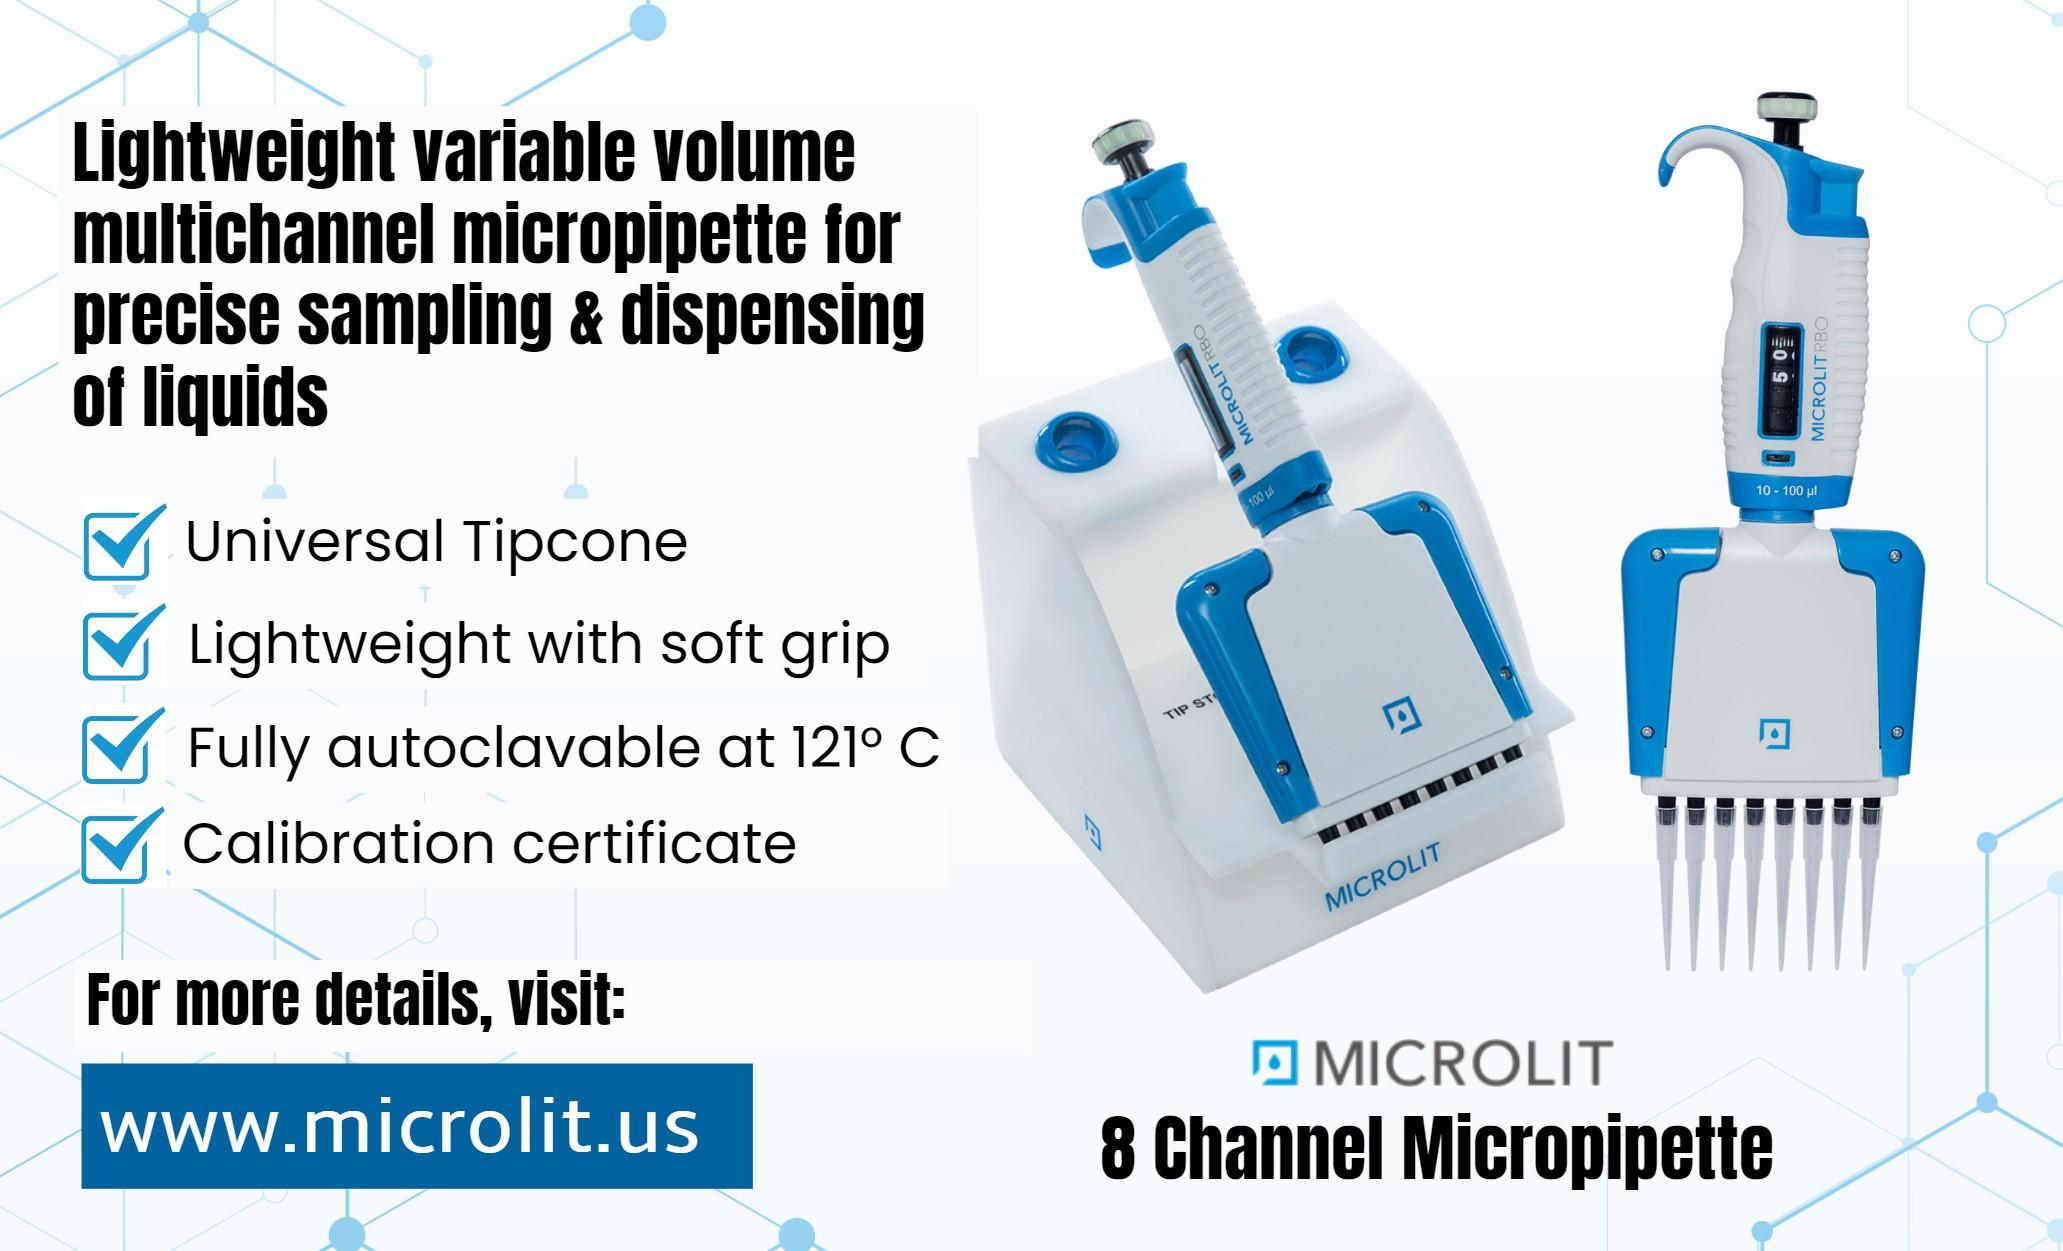 Image - Microlit offers the lightweight variable volume #MultichannelMicropipette for precise liquid handling, suits ...